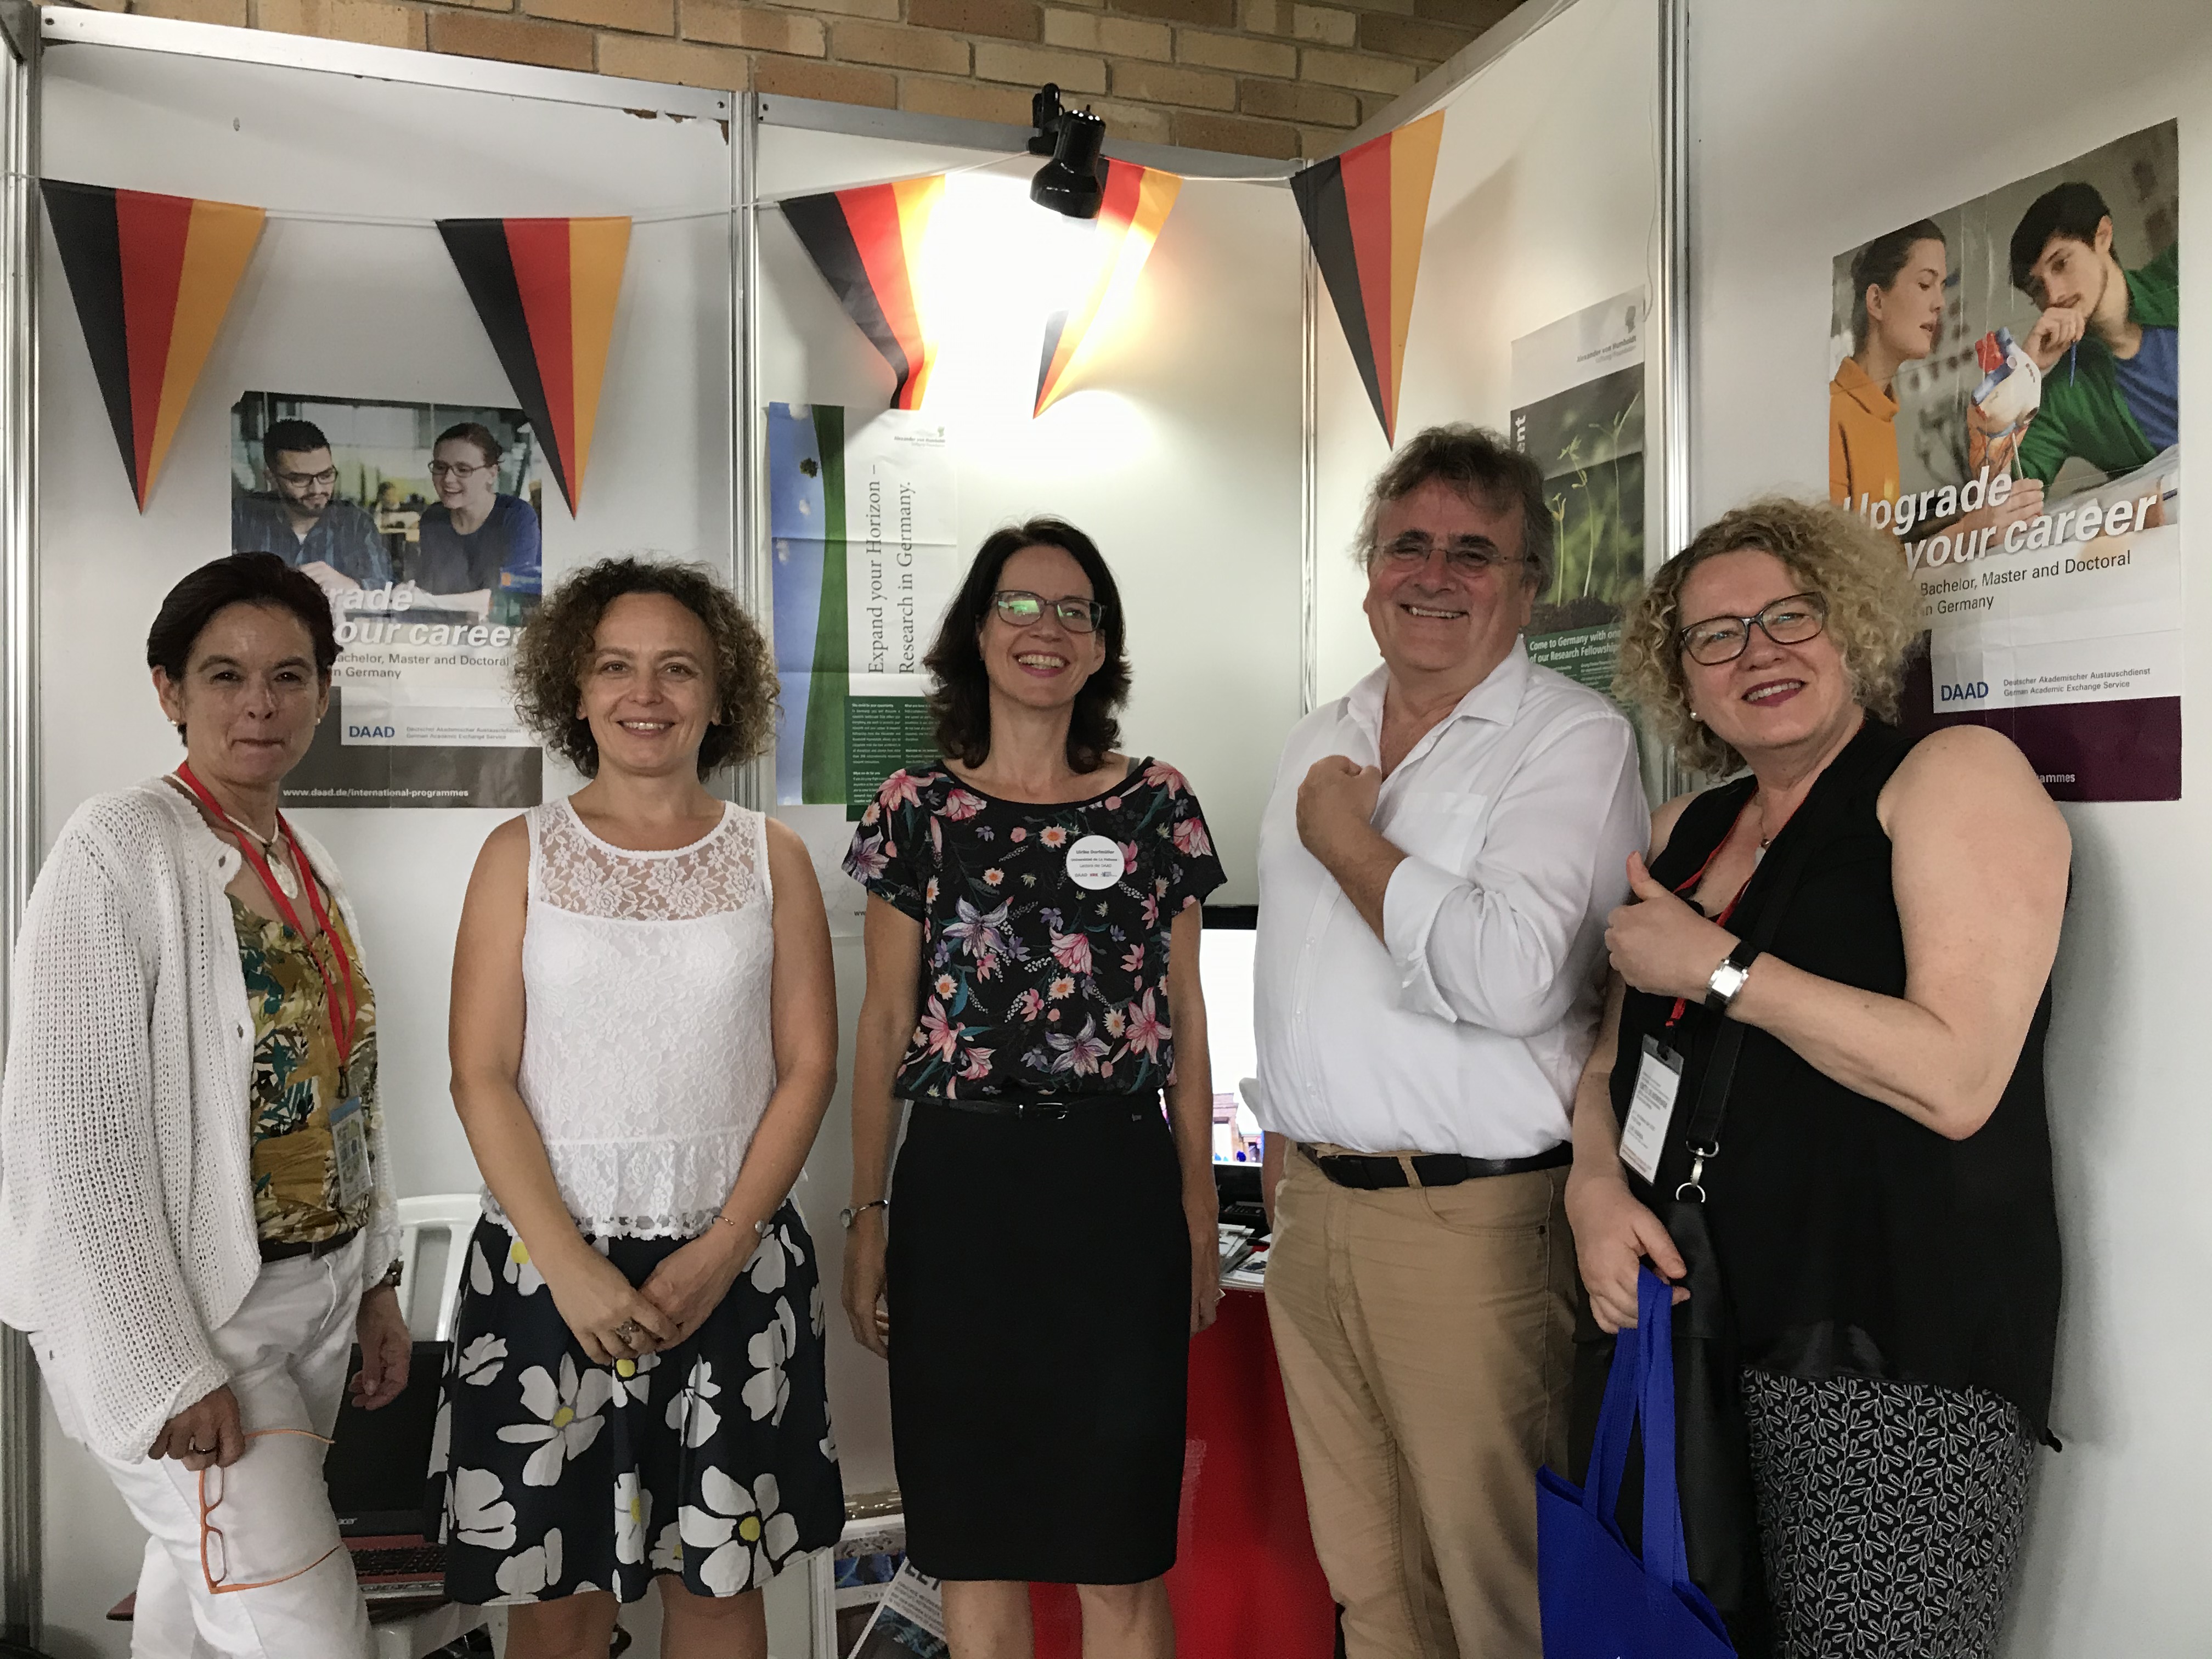 At the German institutions' booth: Prof. Dr. Susanne Hilland (University of Heilbronn), Dr. Kathrin Winkler (DFG Latin America), Dr. Ulrike Dorfmüller (DAAD Cuba), Andreas Trepte (MPG Buenos Aires) and Christine Arndt (DAAD)